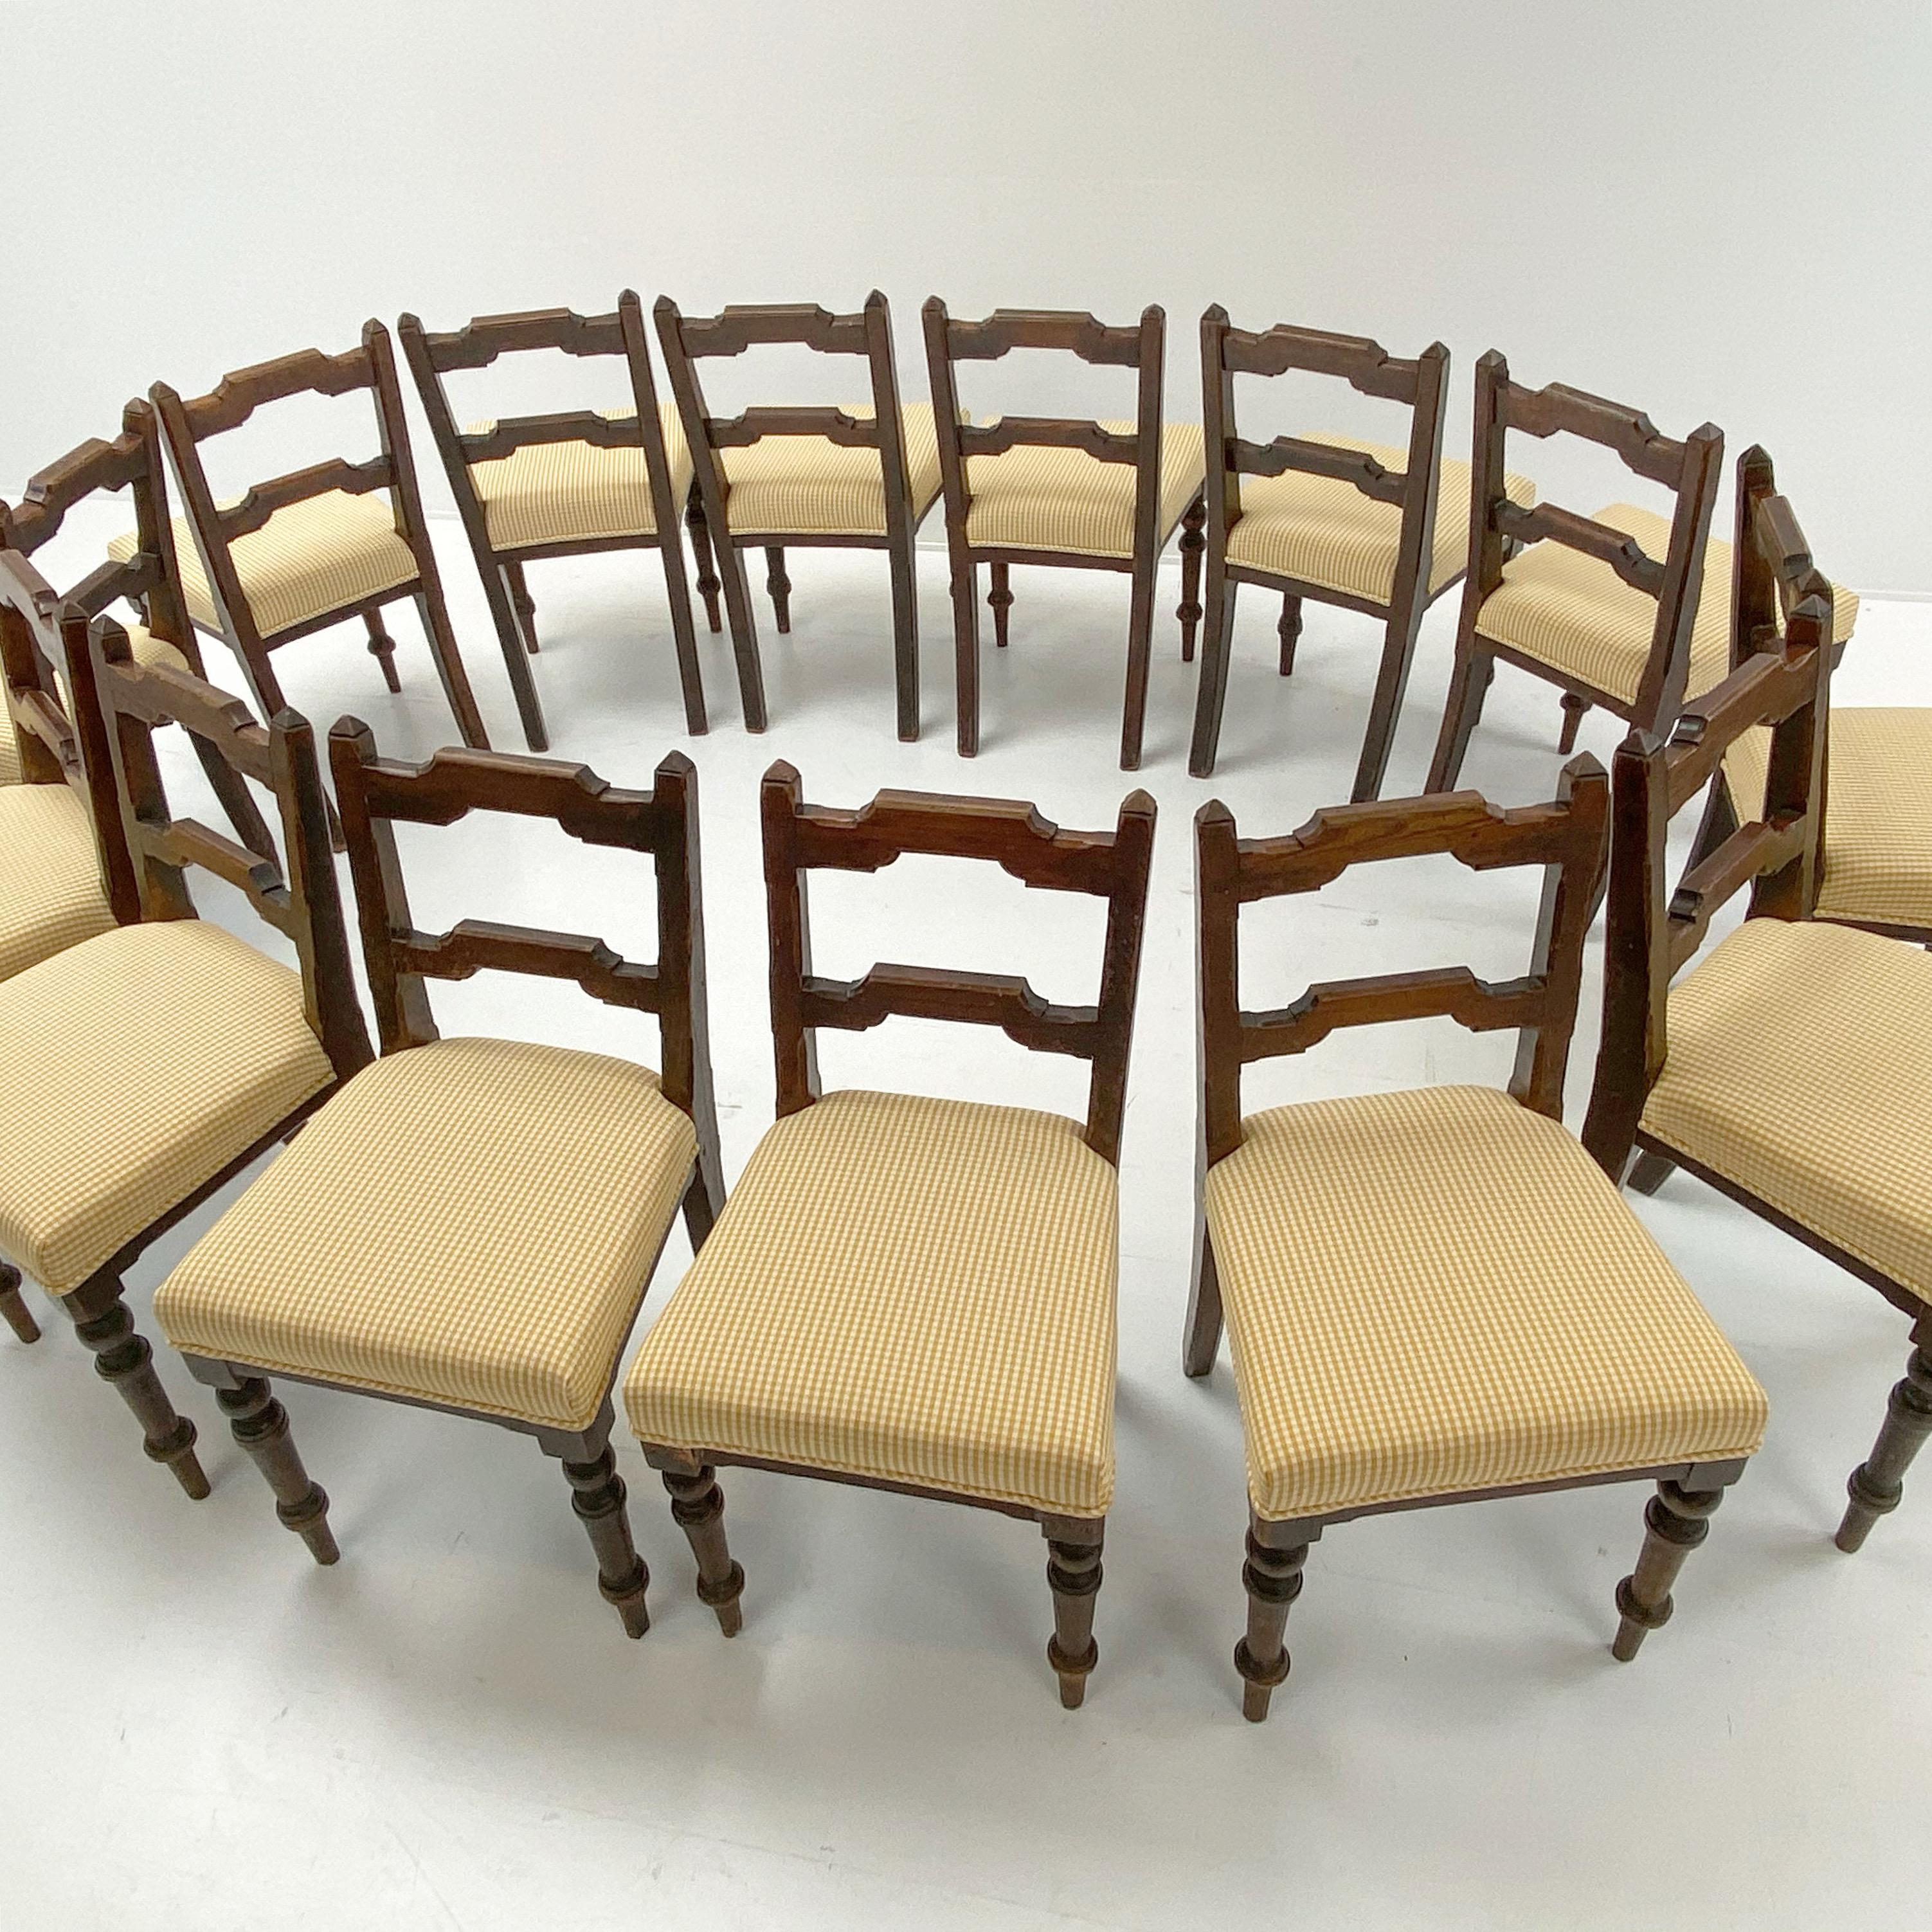 Rare Set of 14 Rustic Chairs in Pine with New Upholstery, Ireland 7